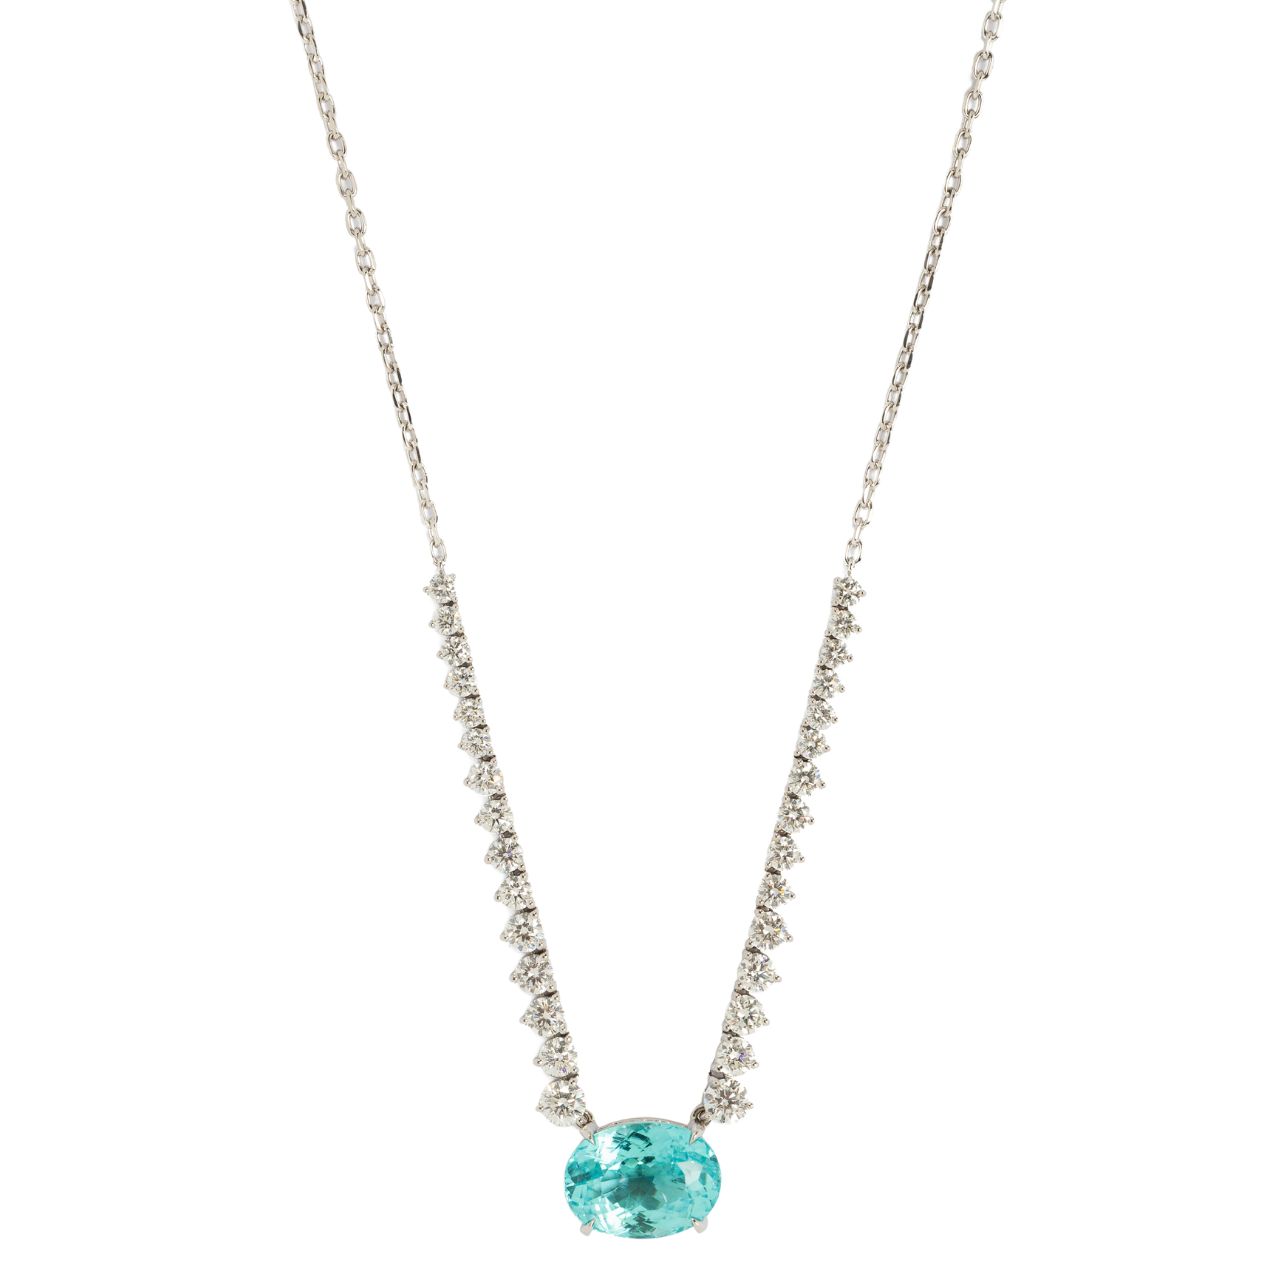 Paraiba tourmaline River Chain necklace with white diamonds in 18k white gold. Paraiba tourmaline with certificate.